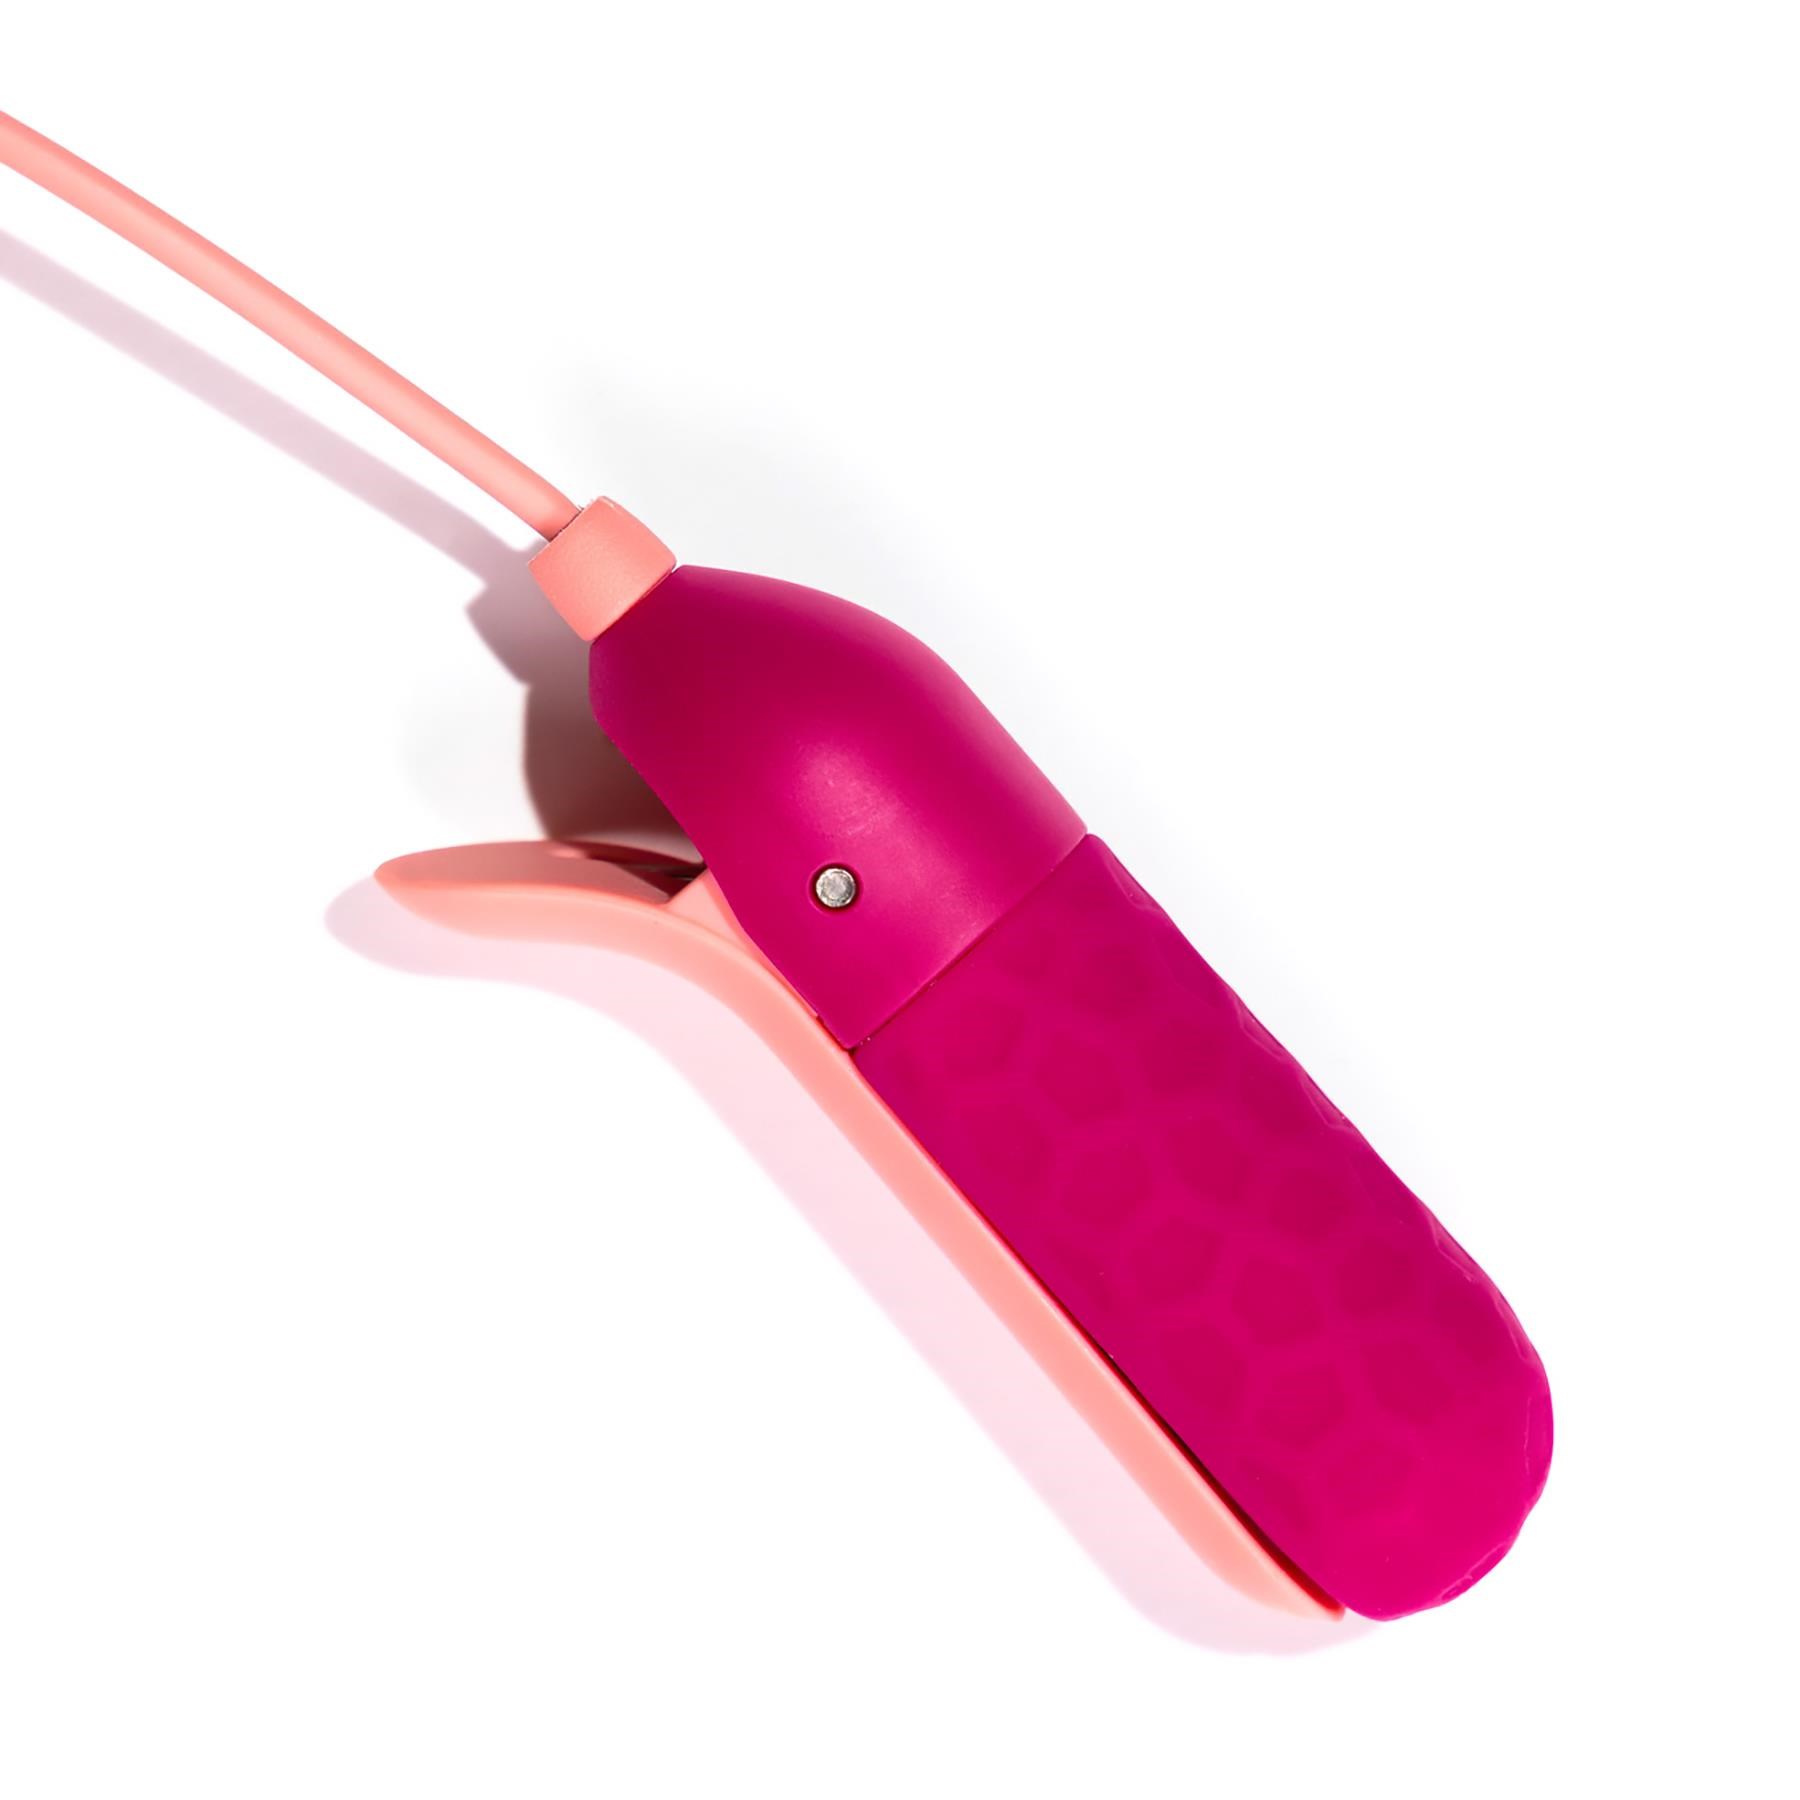 Lovelife Sphinx Vibrating Nipple Clamps - Product Shot